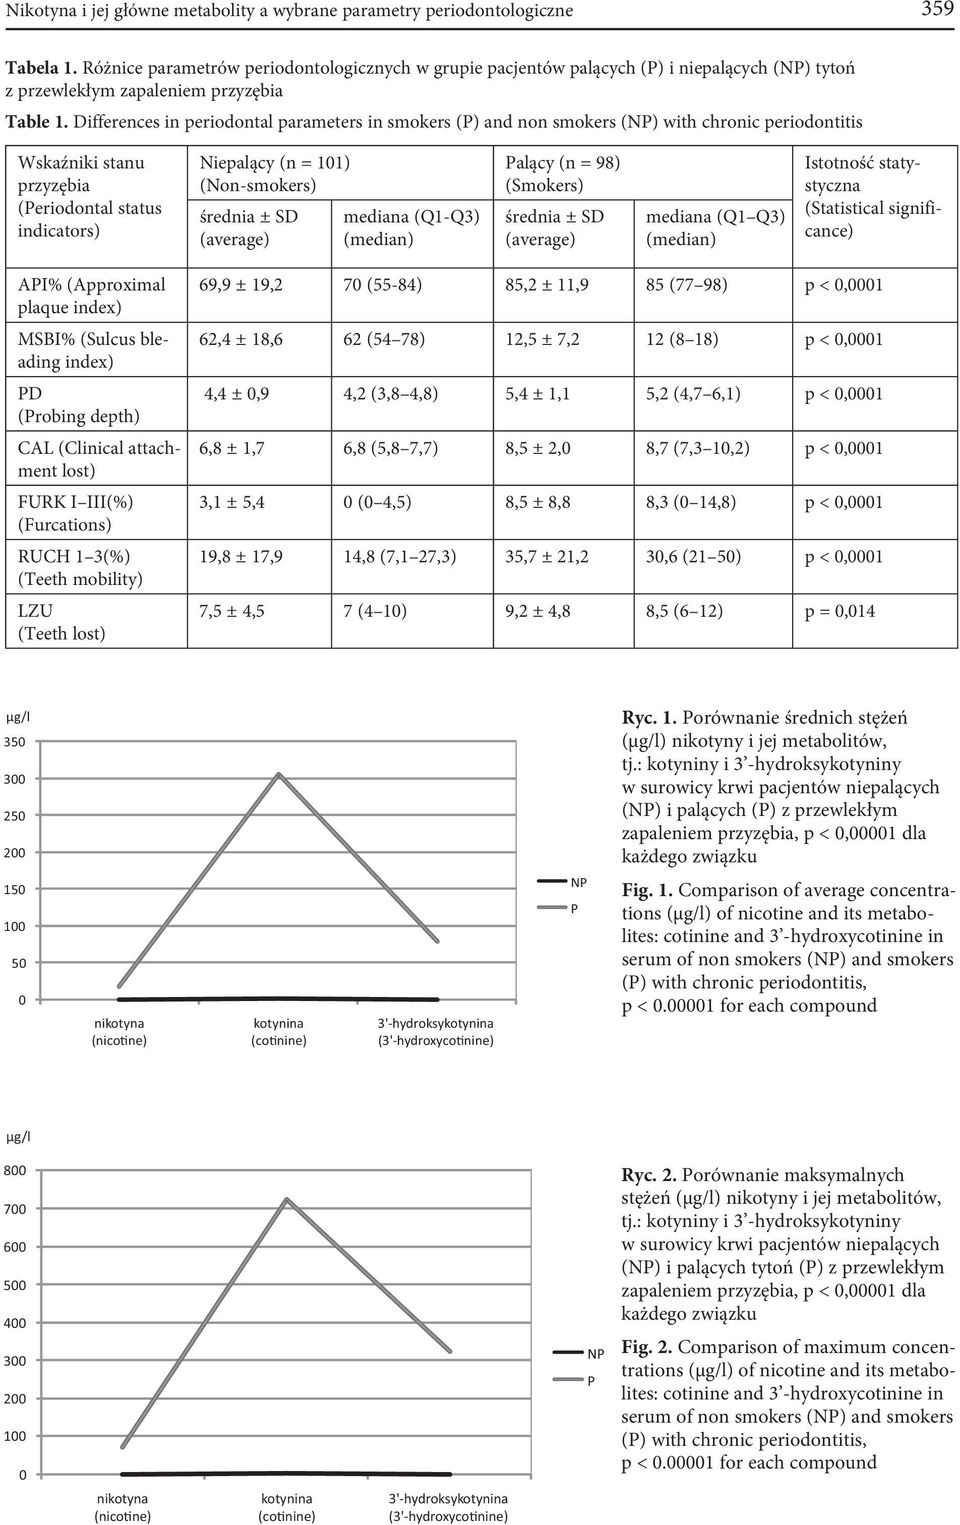 Differences in periodontal parameters in smokers (P) and non smokers (NP) with chronic periodontitis Wskaźniki stanu przyzębia (Periodontal status indicators) Niepalący (n = 101) (Non-smokers)